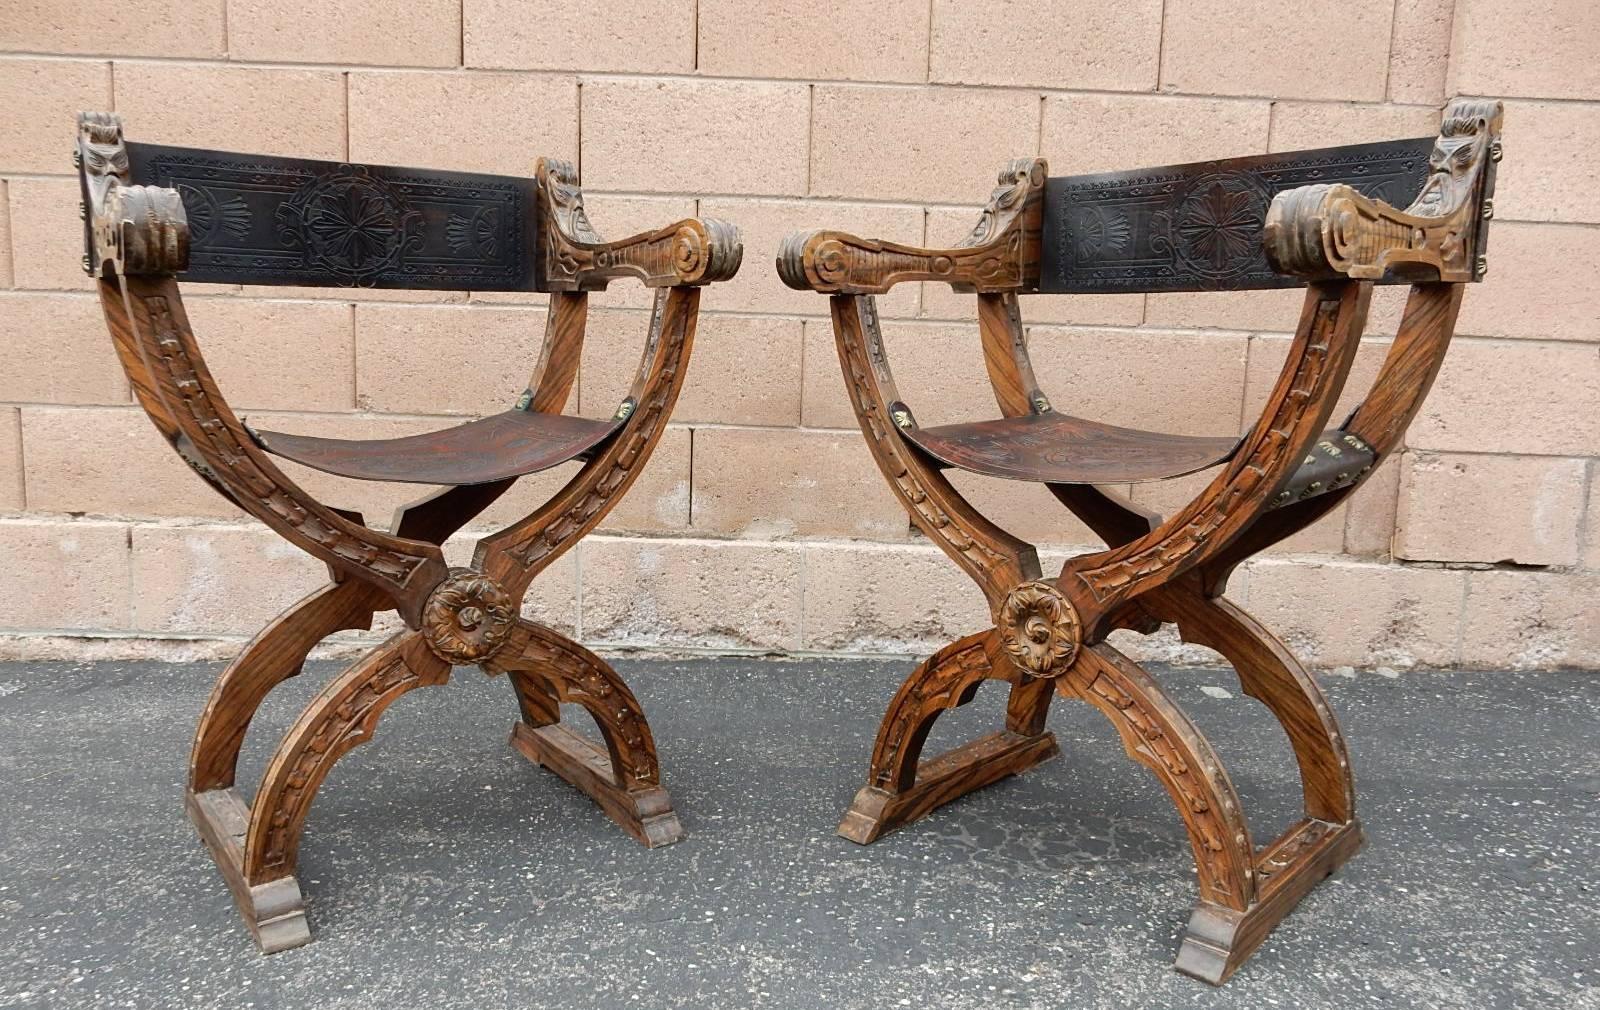 Dining set from Spain or Italy. Gorgeous set of six chairs all hand-carved by artisans with leather set and back attached with decorative bronze studs, circa 1950. The detail of the wood carving and grain is truly amazing.
Table legs are a carved